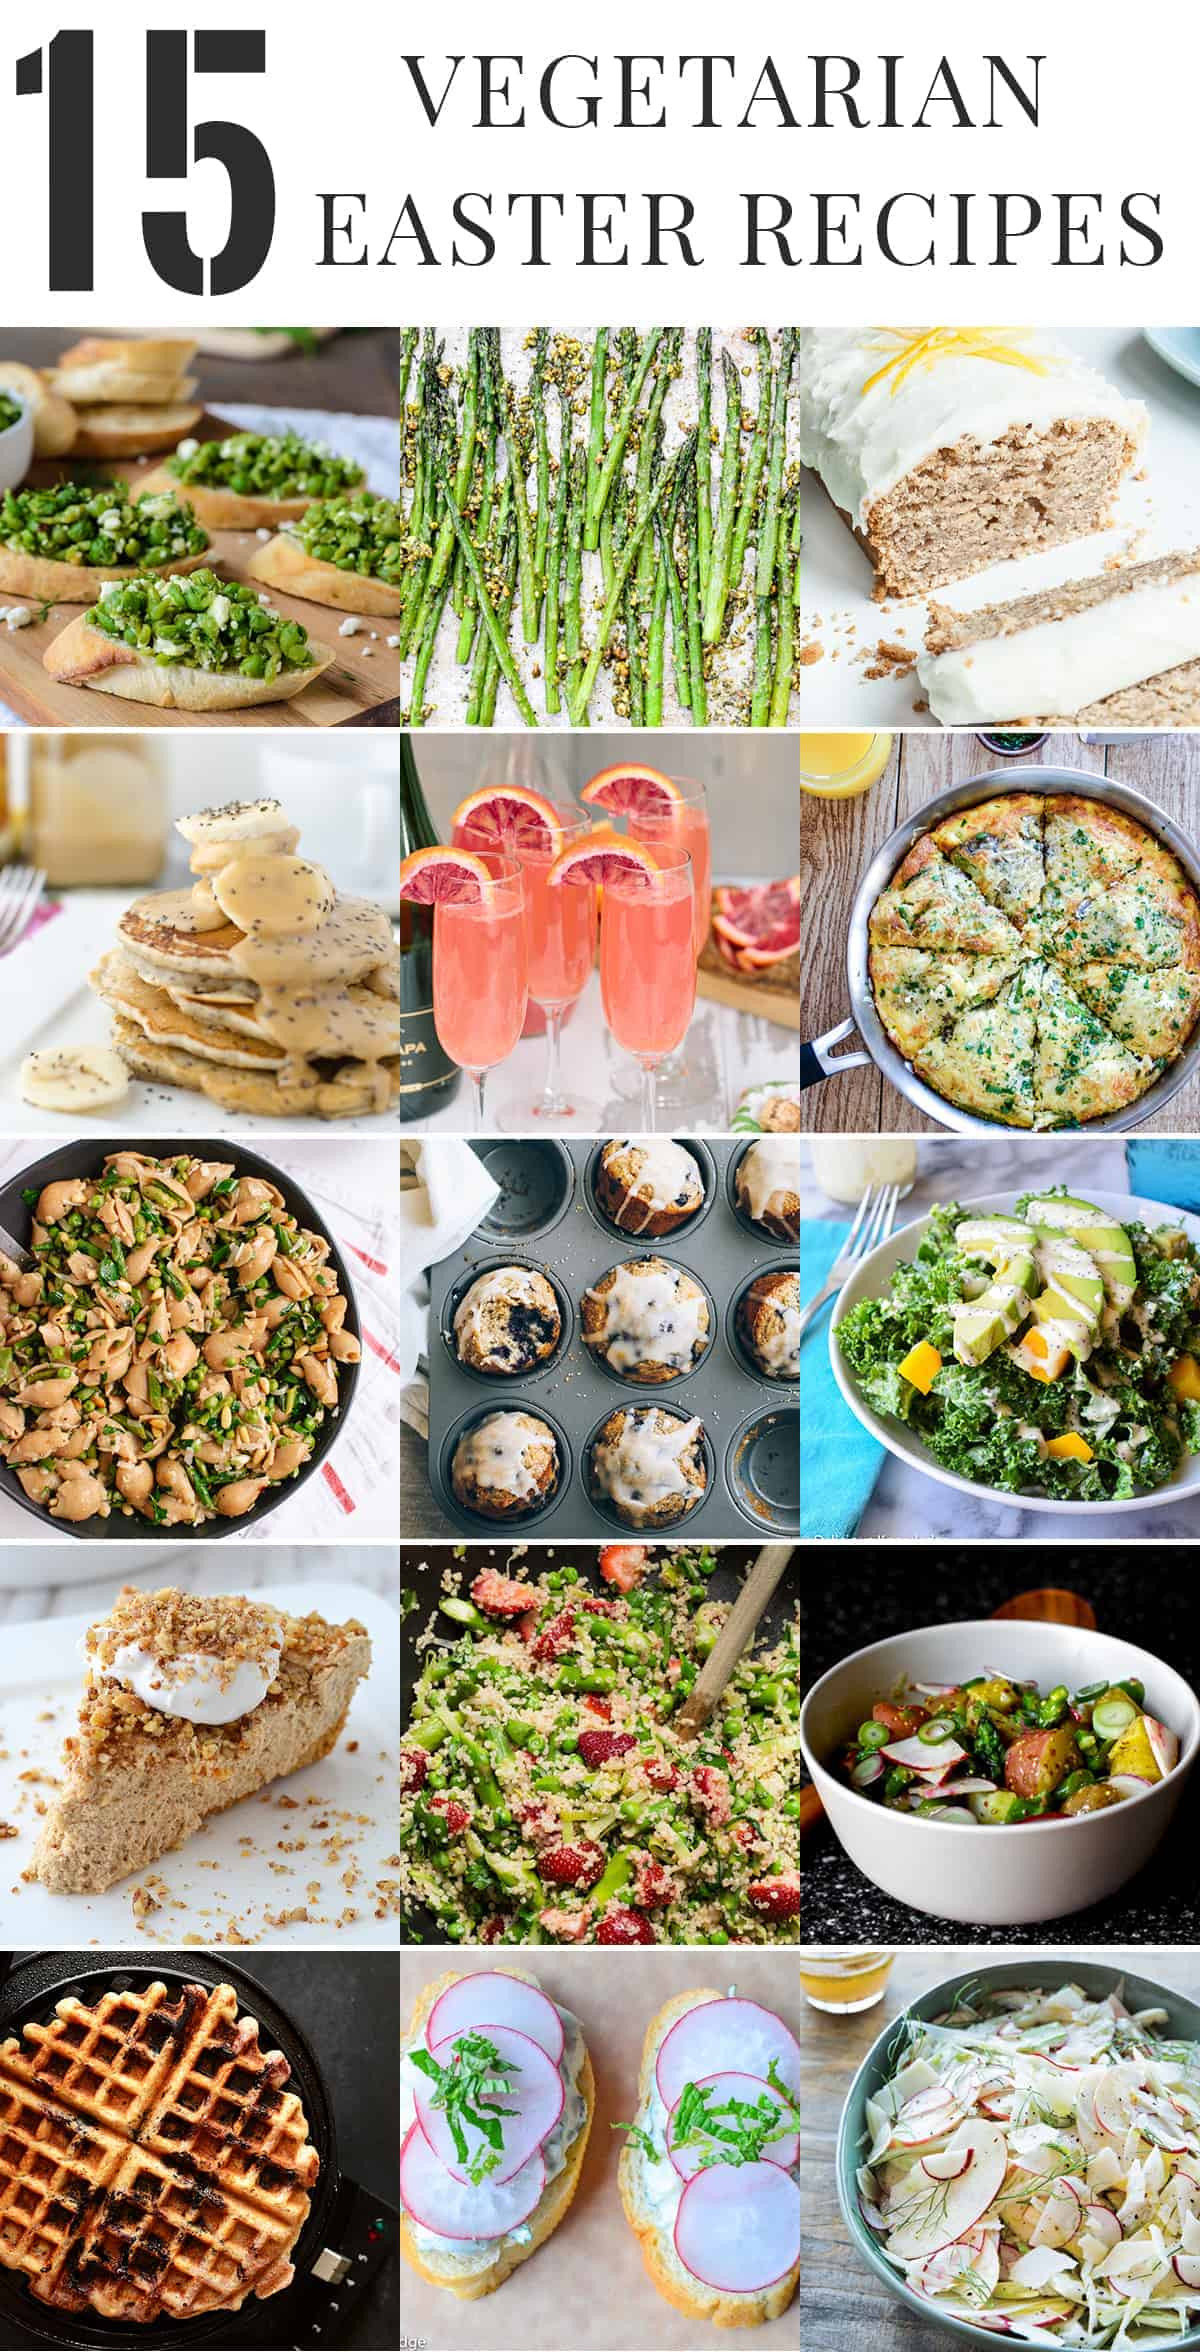 Easter Dinner Vegetable Recipes
 Healthy Ve arian Easter Recipes Delish Knowledge